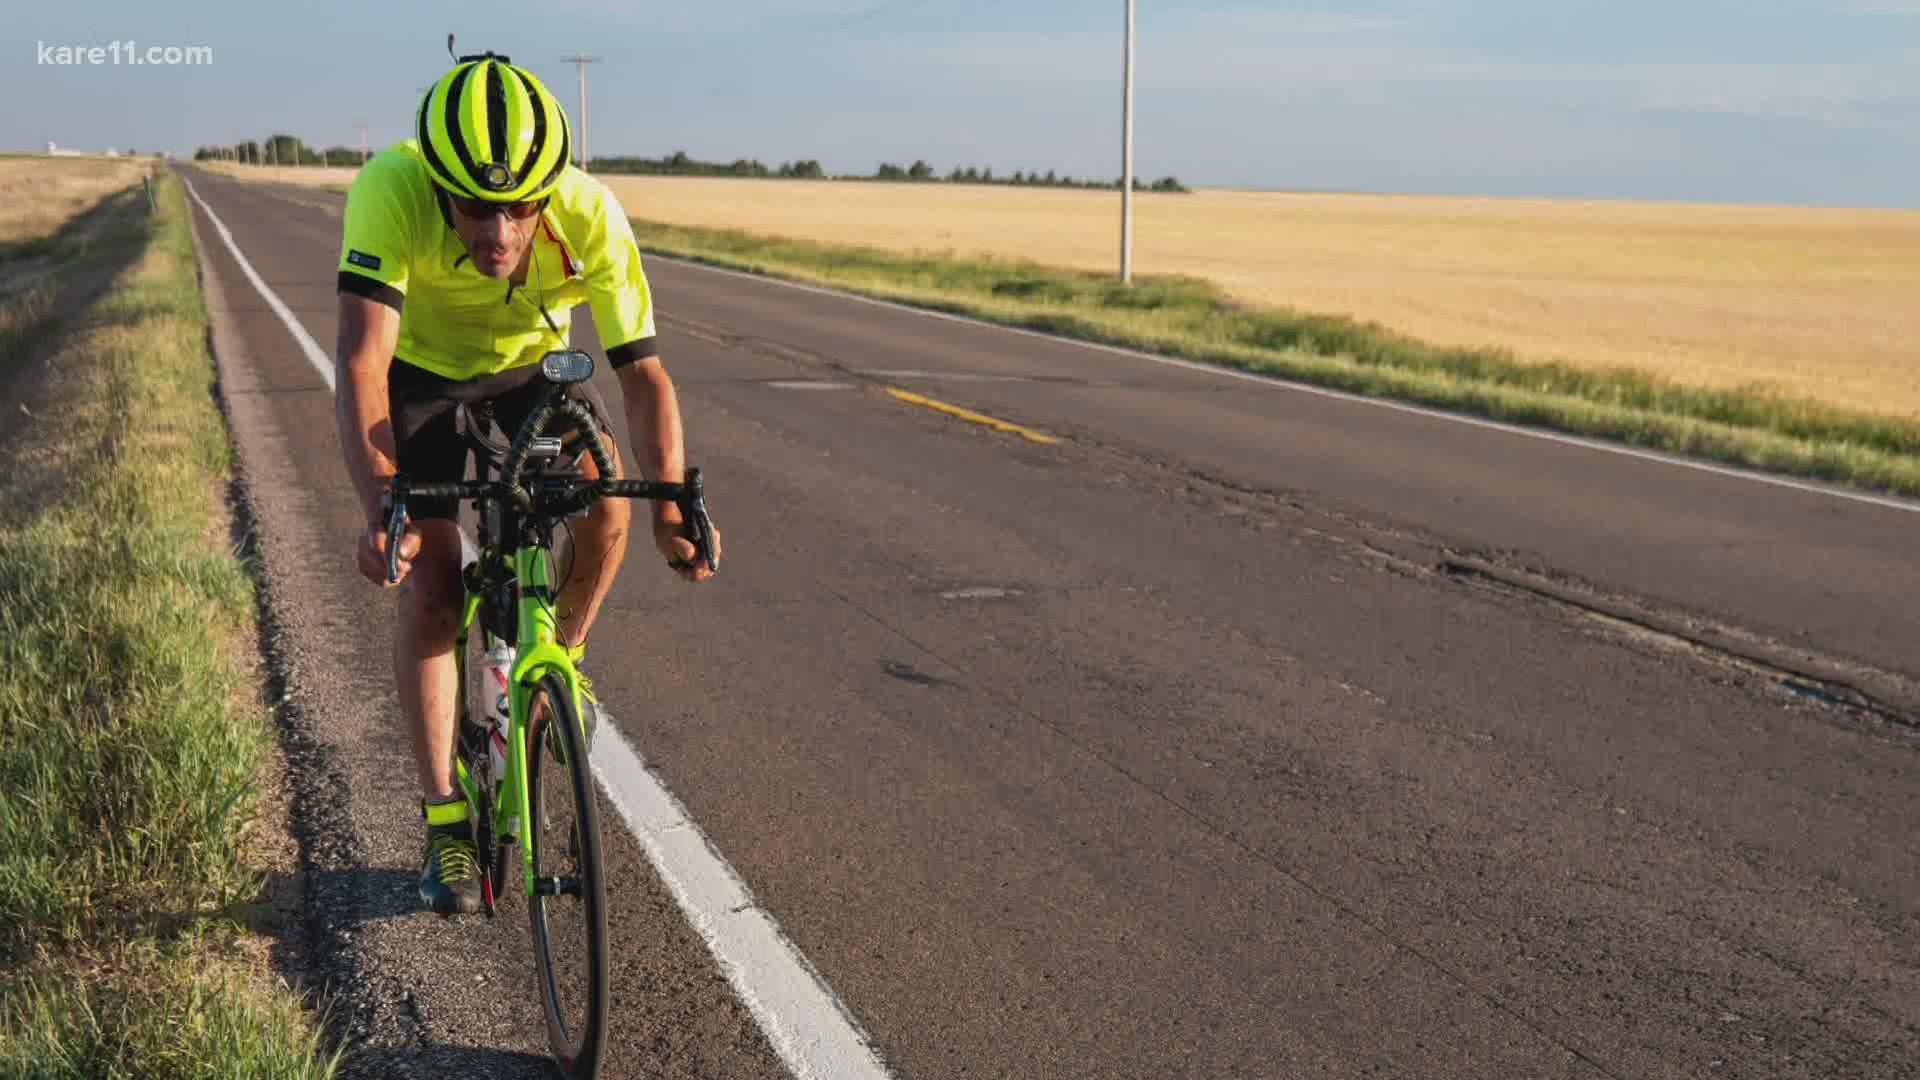 One Minnesota man is attempting to break the Guinness world record for visiting each of the lower 48 states by bicycle.